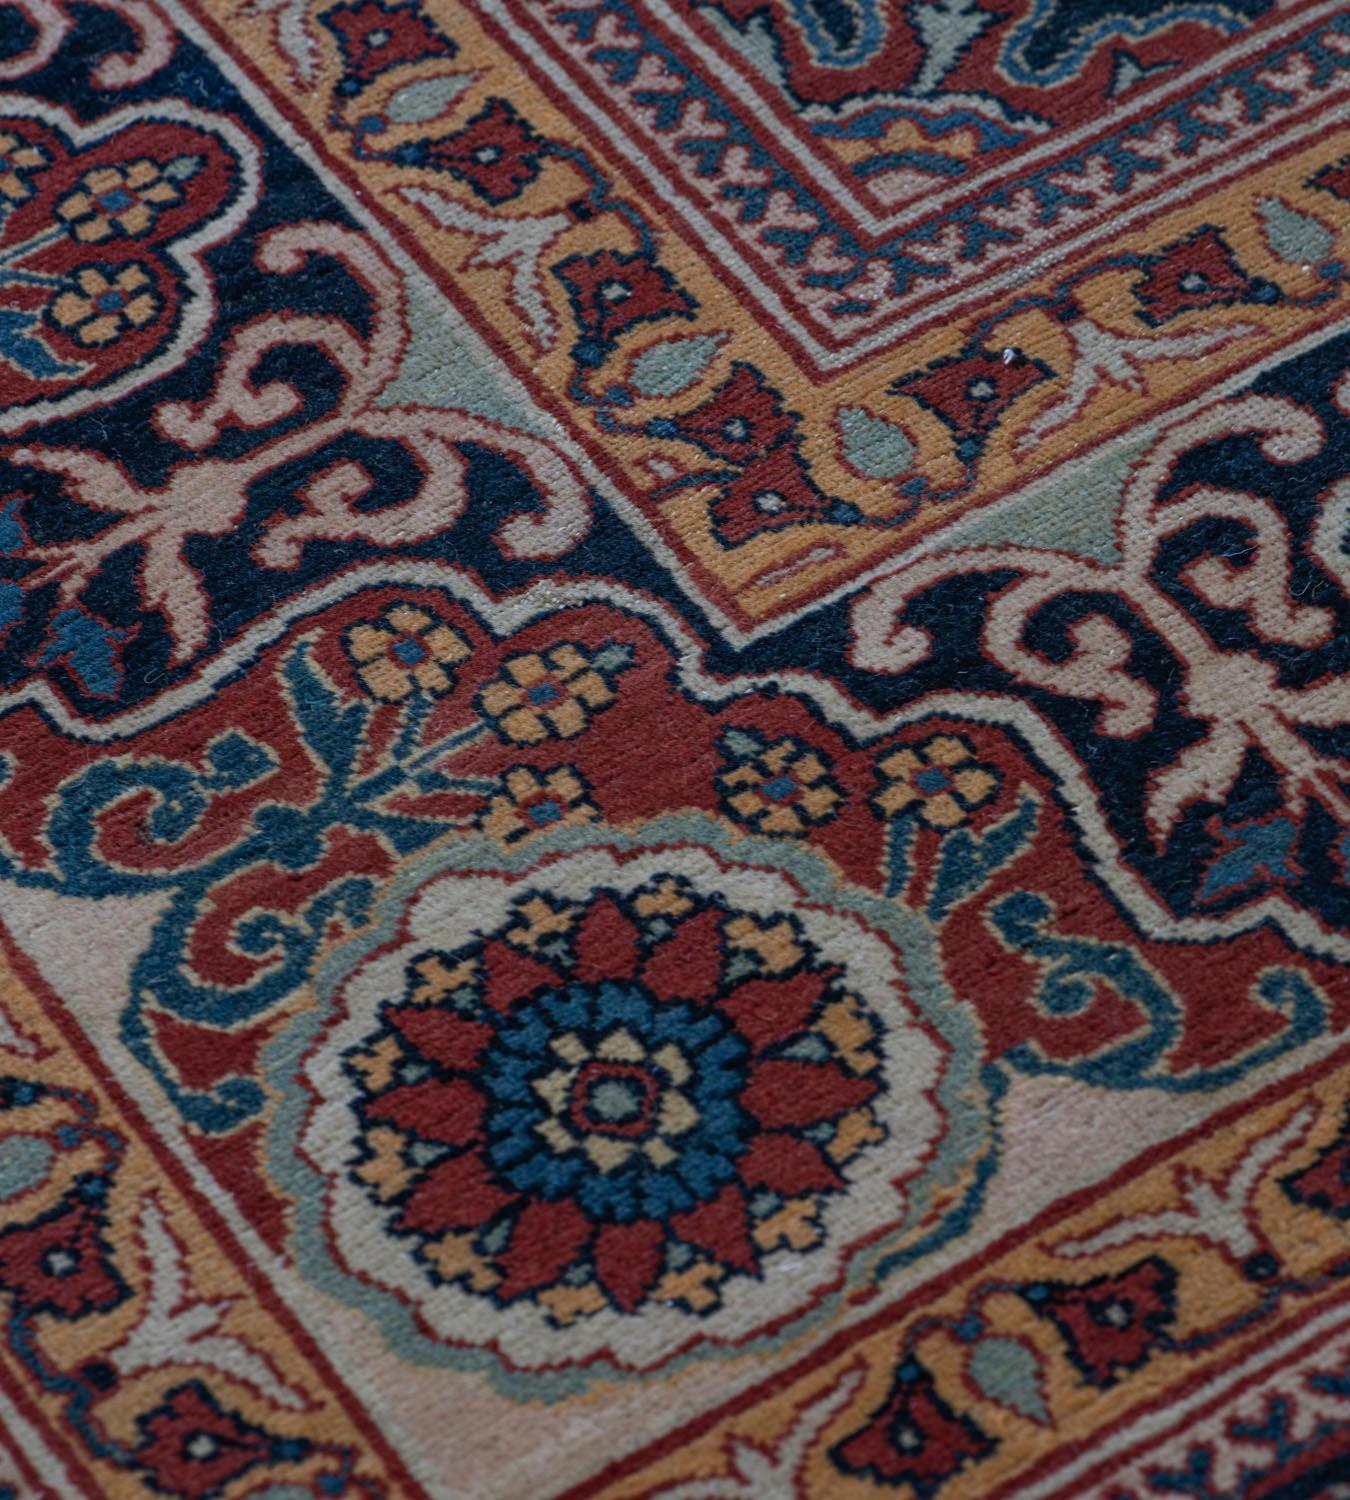 This traditional hand-woven Persian Tabriz rug has a shaded indigo overall field of rosette pendants issuing stylized cusped lozenge forming matrix, each panel enclosing a radiating arabesque floral motif, in an elegant reciprocal indigo and